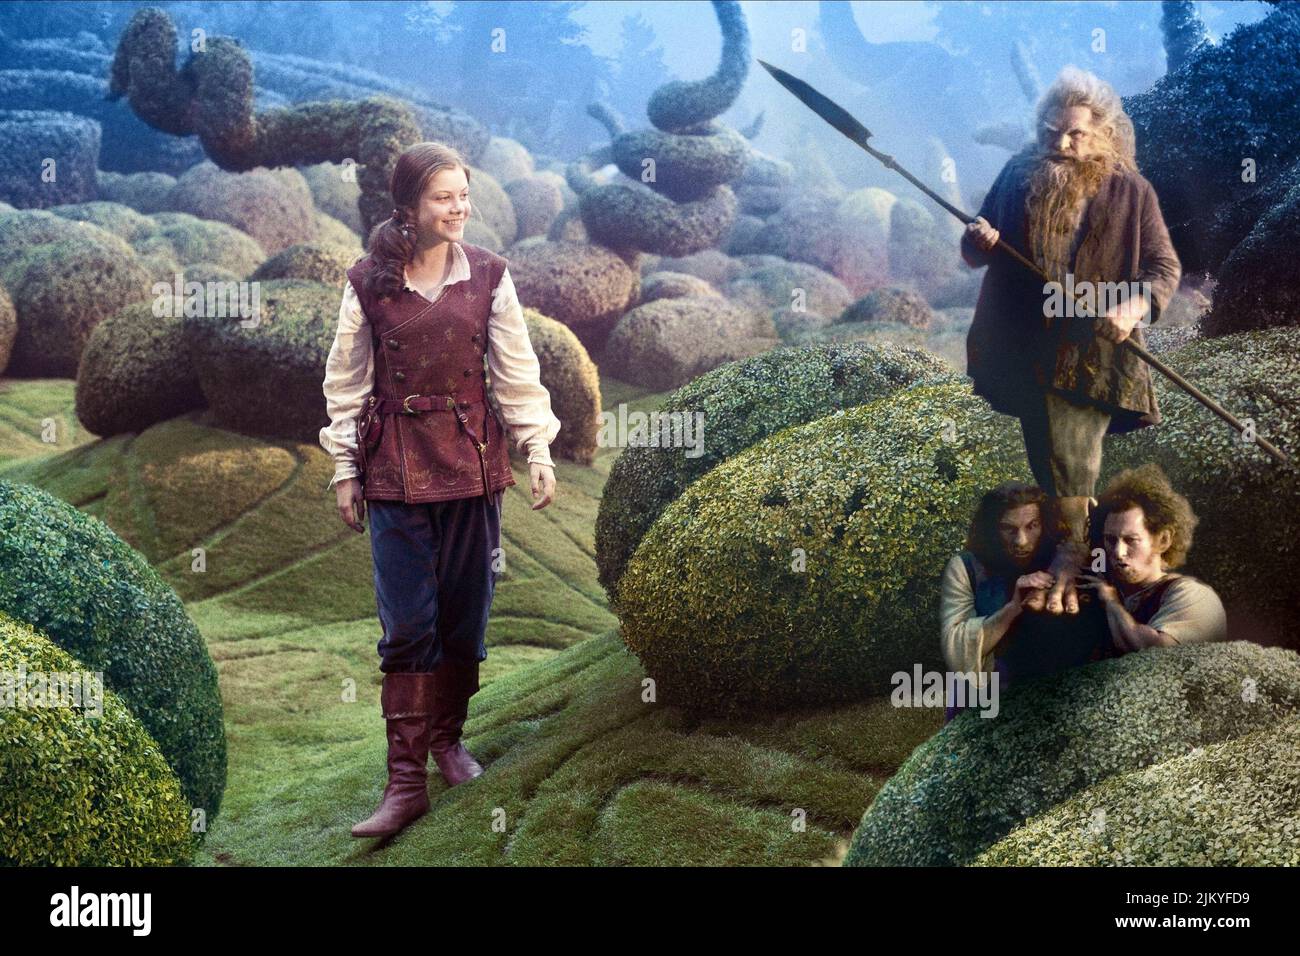 GEORGIE HENLEY, THE CHRONICLES OF NARNIA: THE VOYAGE OF THE DAWN TREADER, 2010 Stock Photo